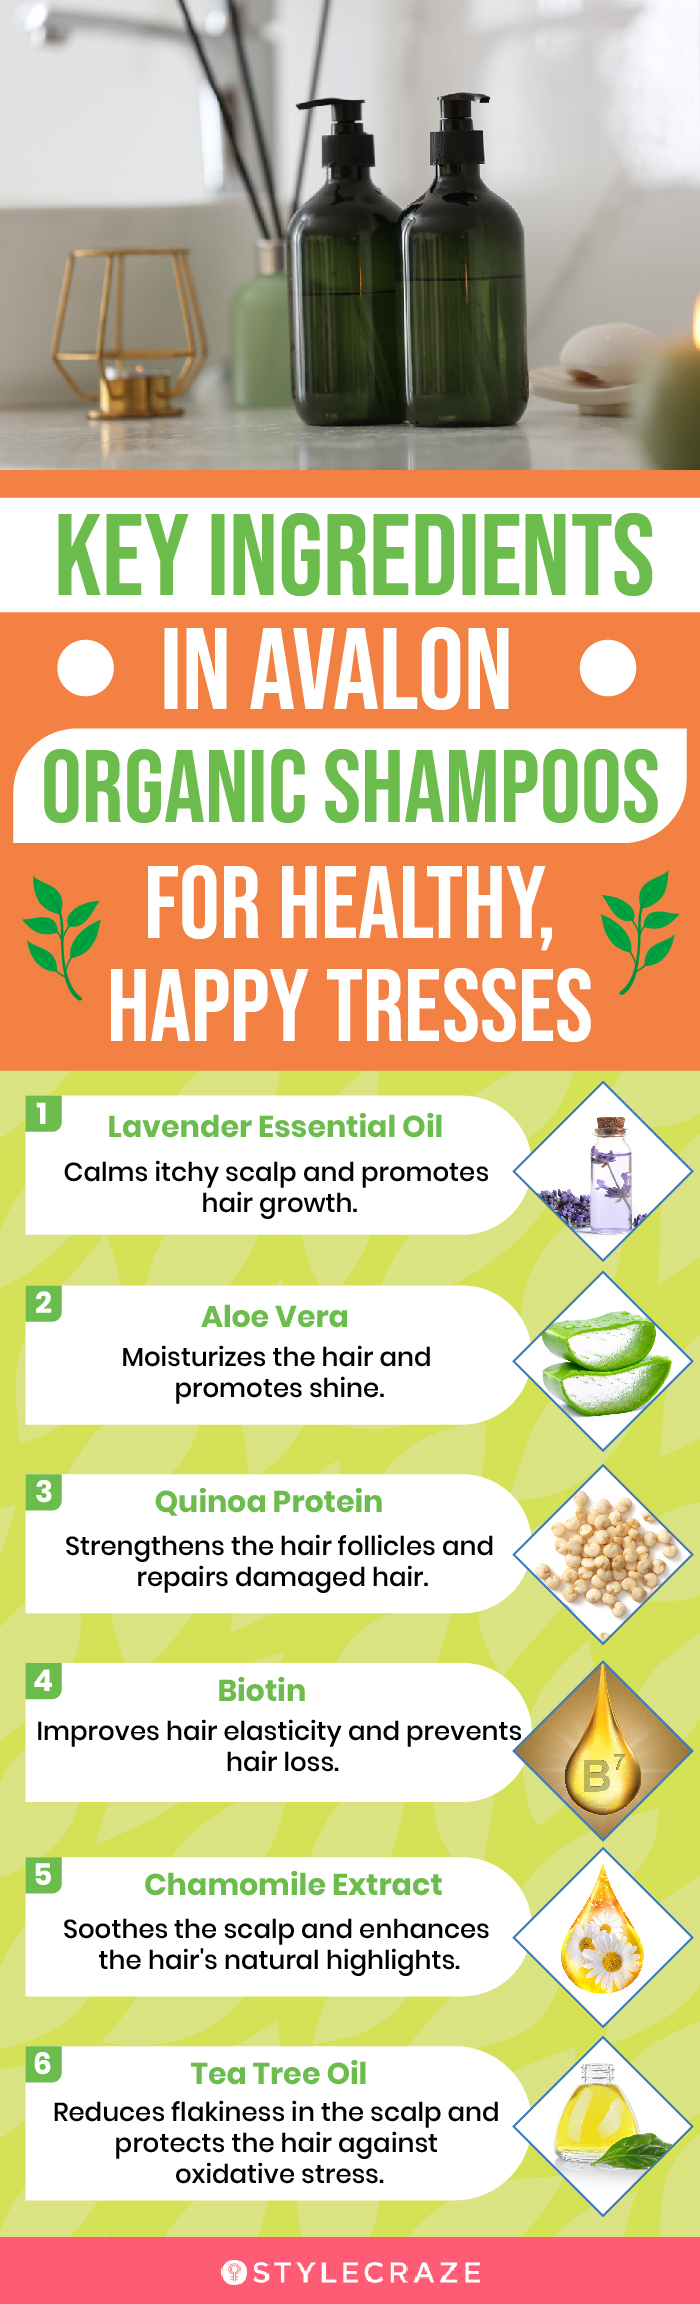 Key Ingredients In Avalon Organic Shampoos For Healthy, Happy Tresses (infographic)